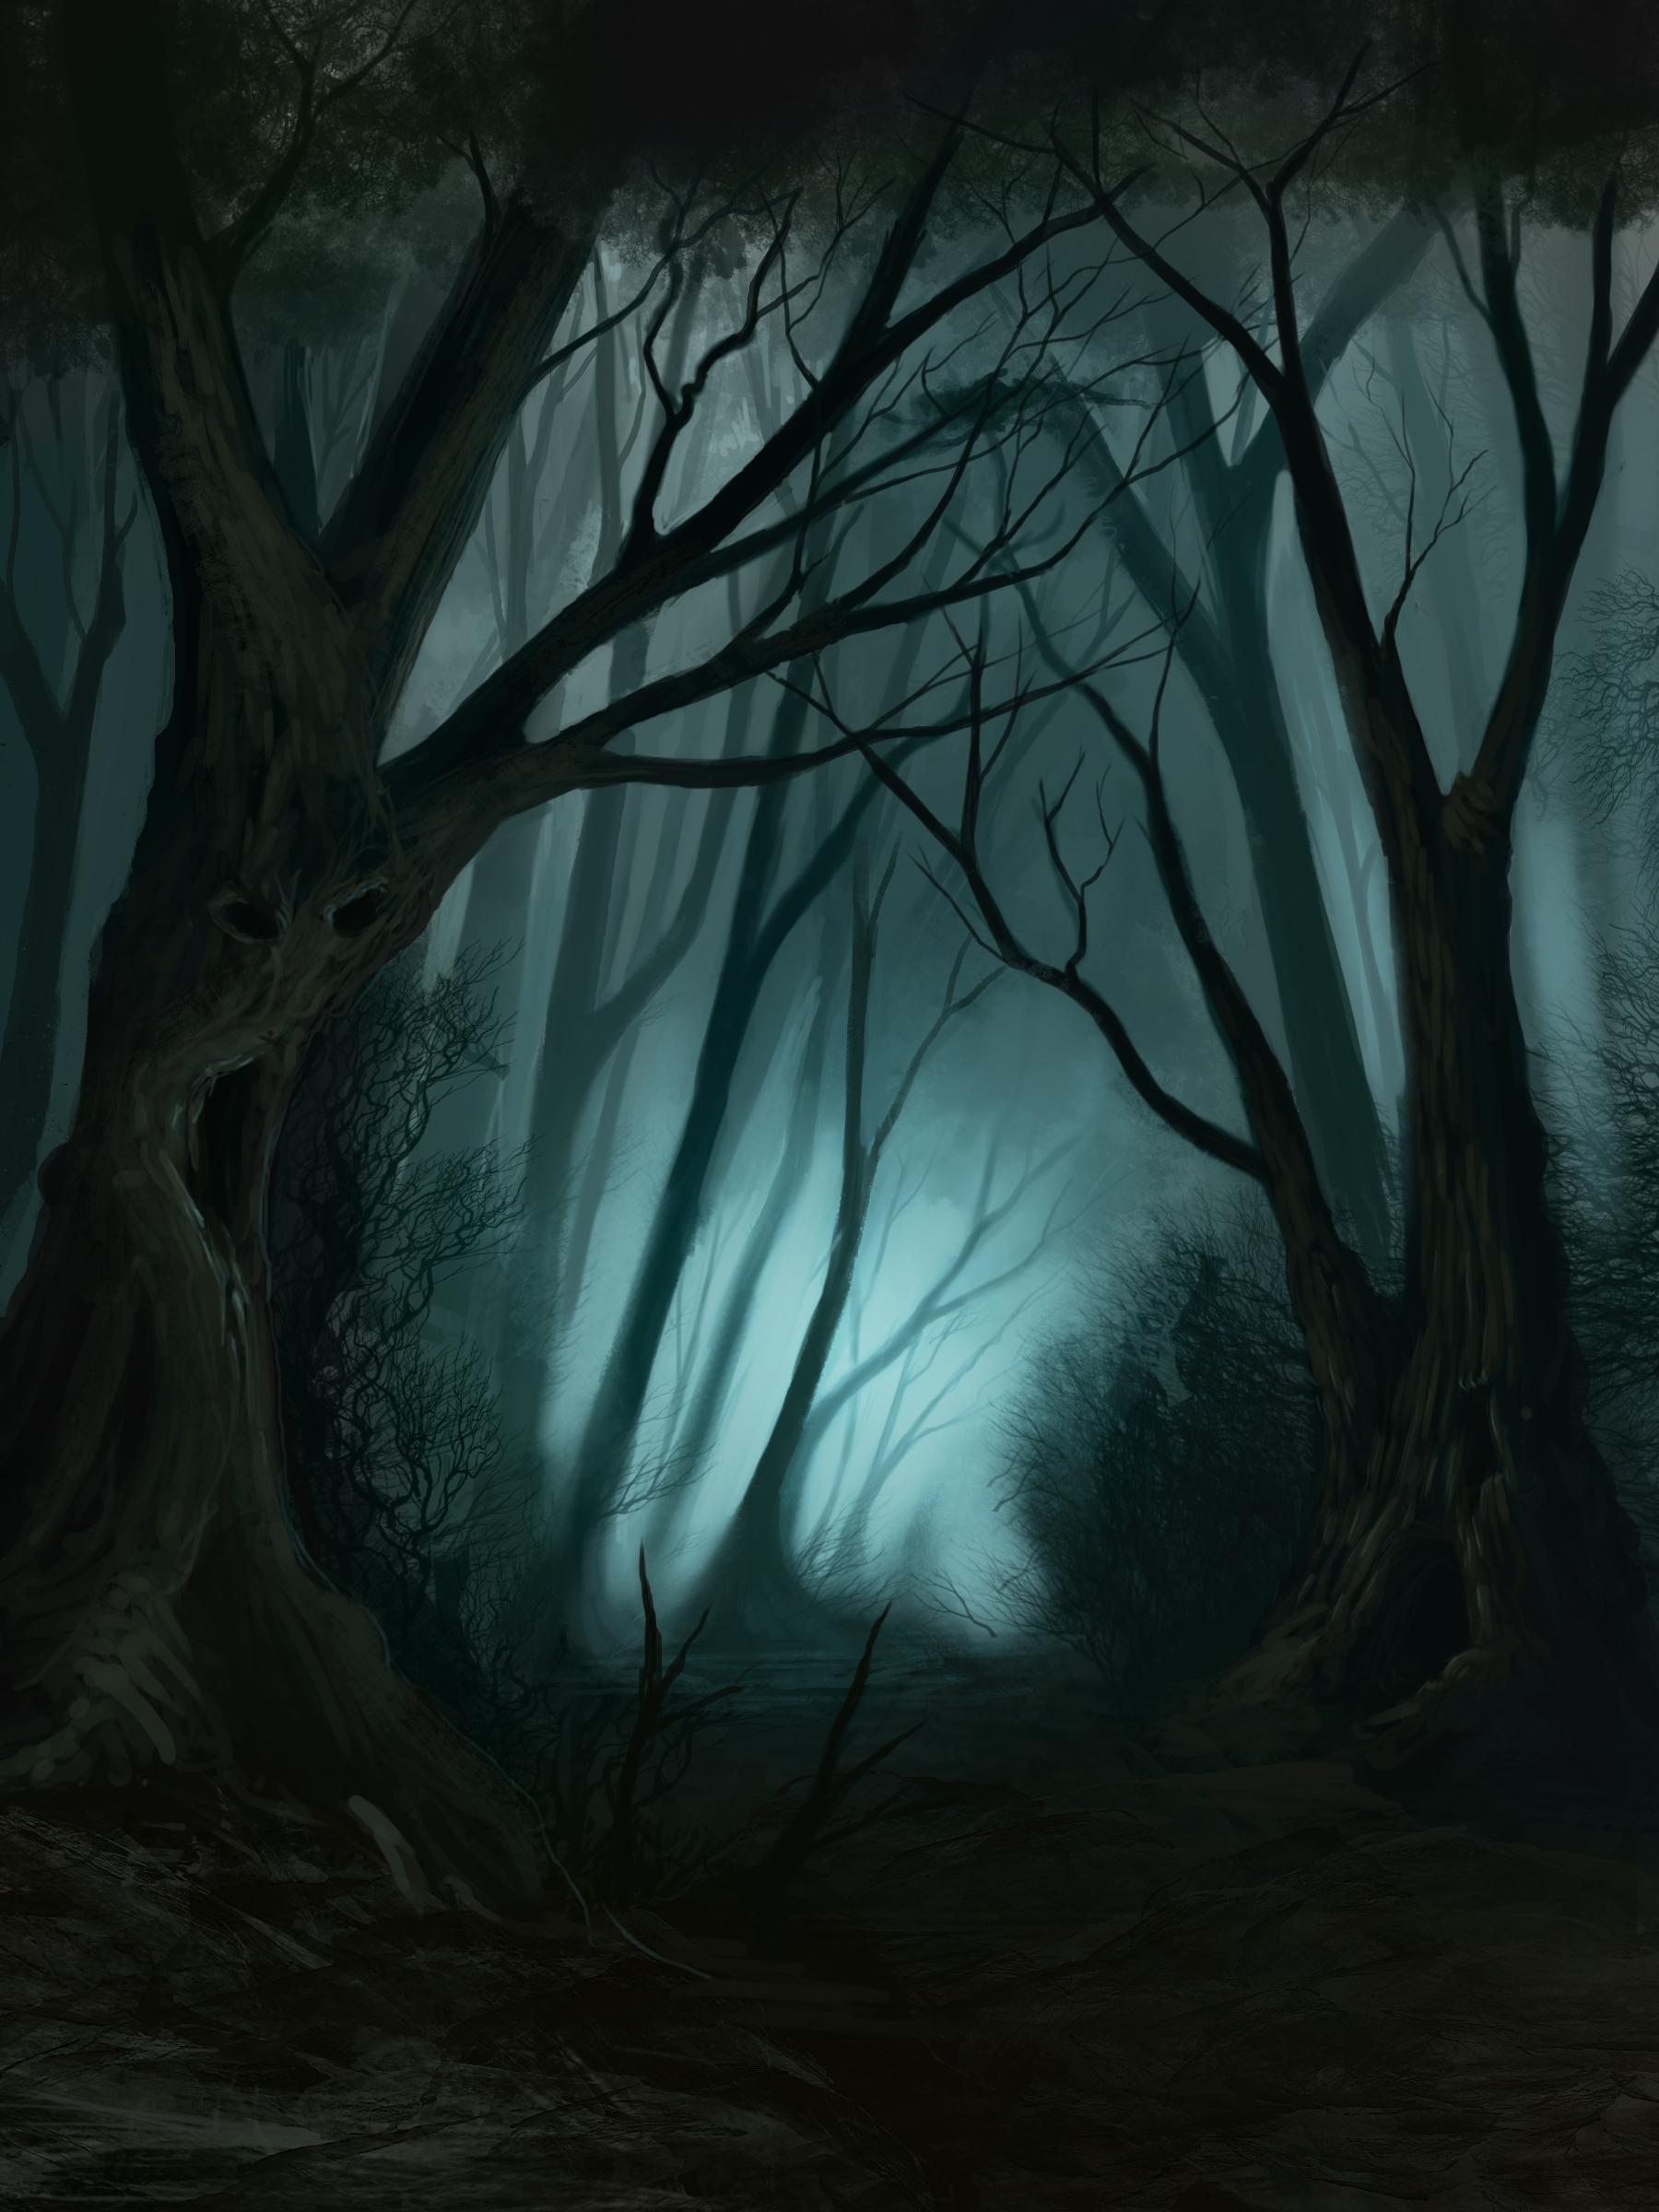 Creepy Forest on Pinterest | Dark Forest, Forests and Haunted Forest